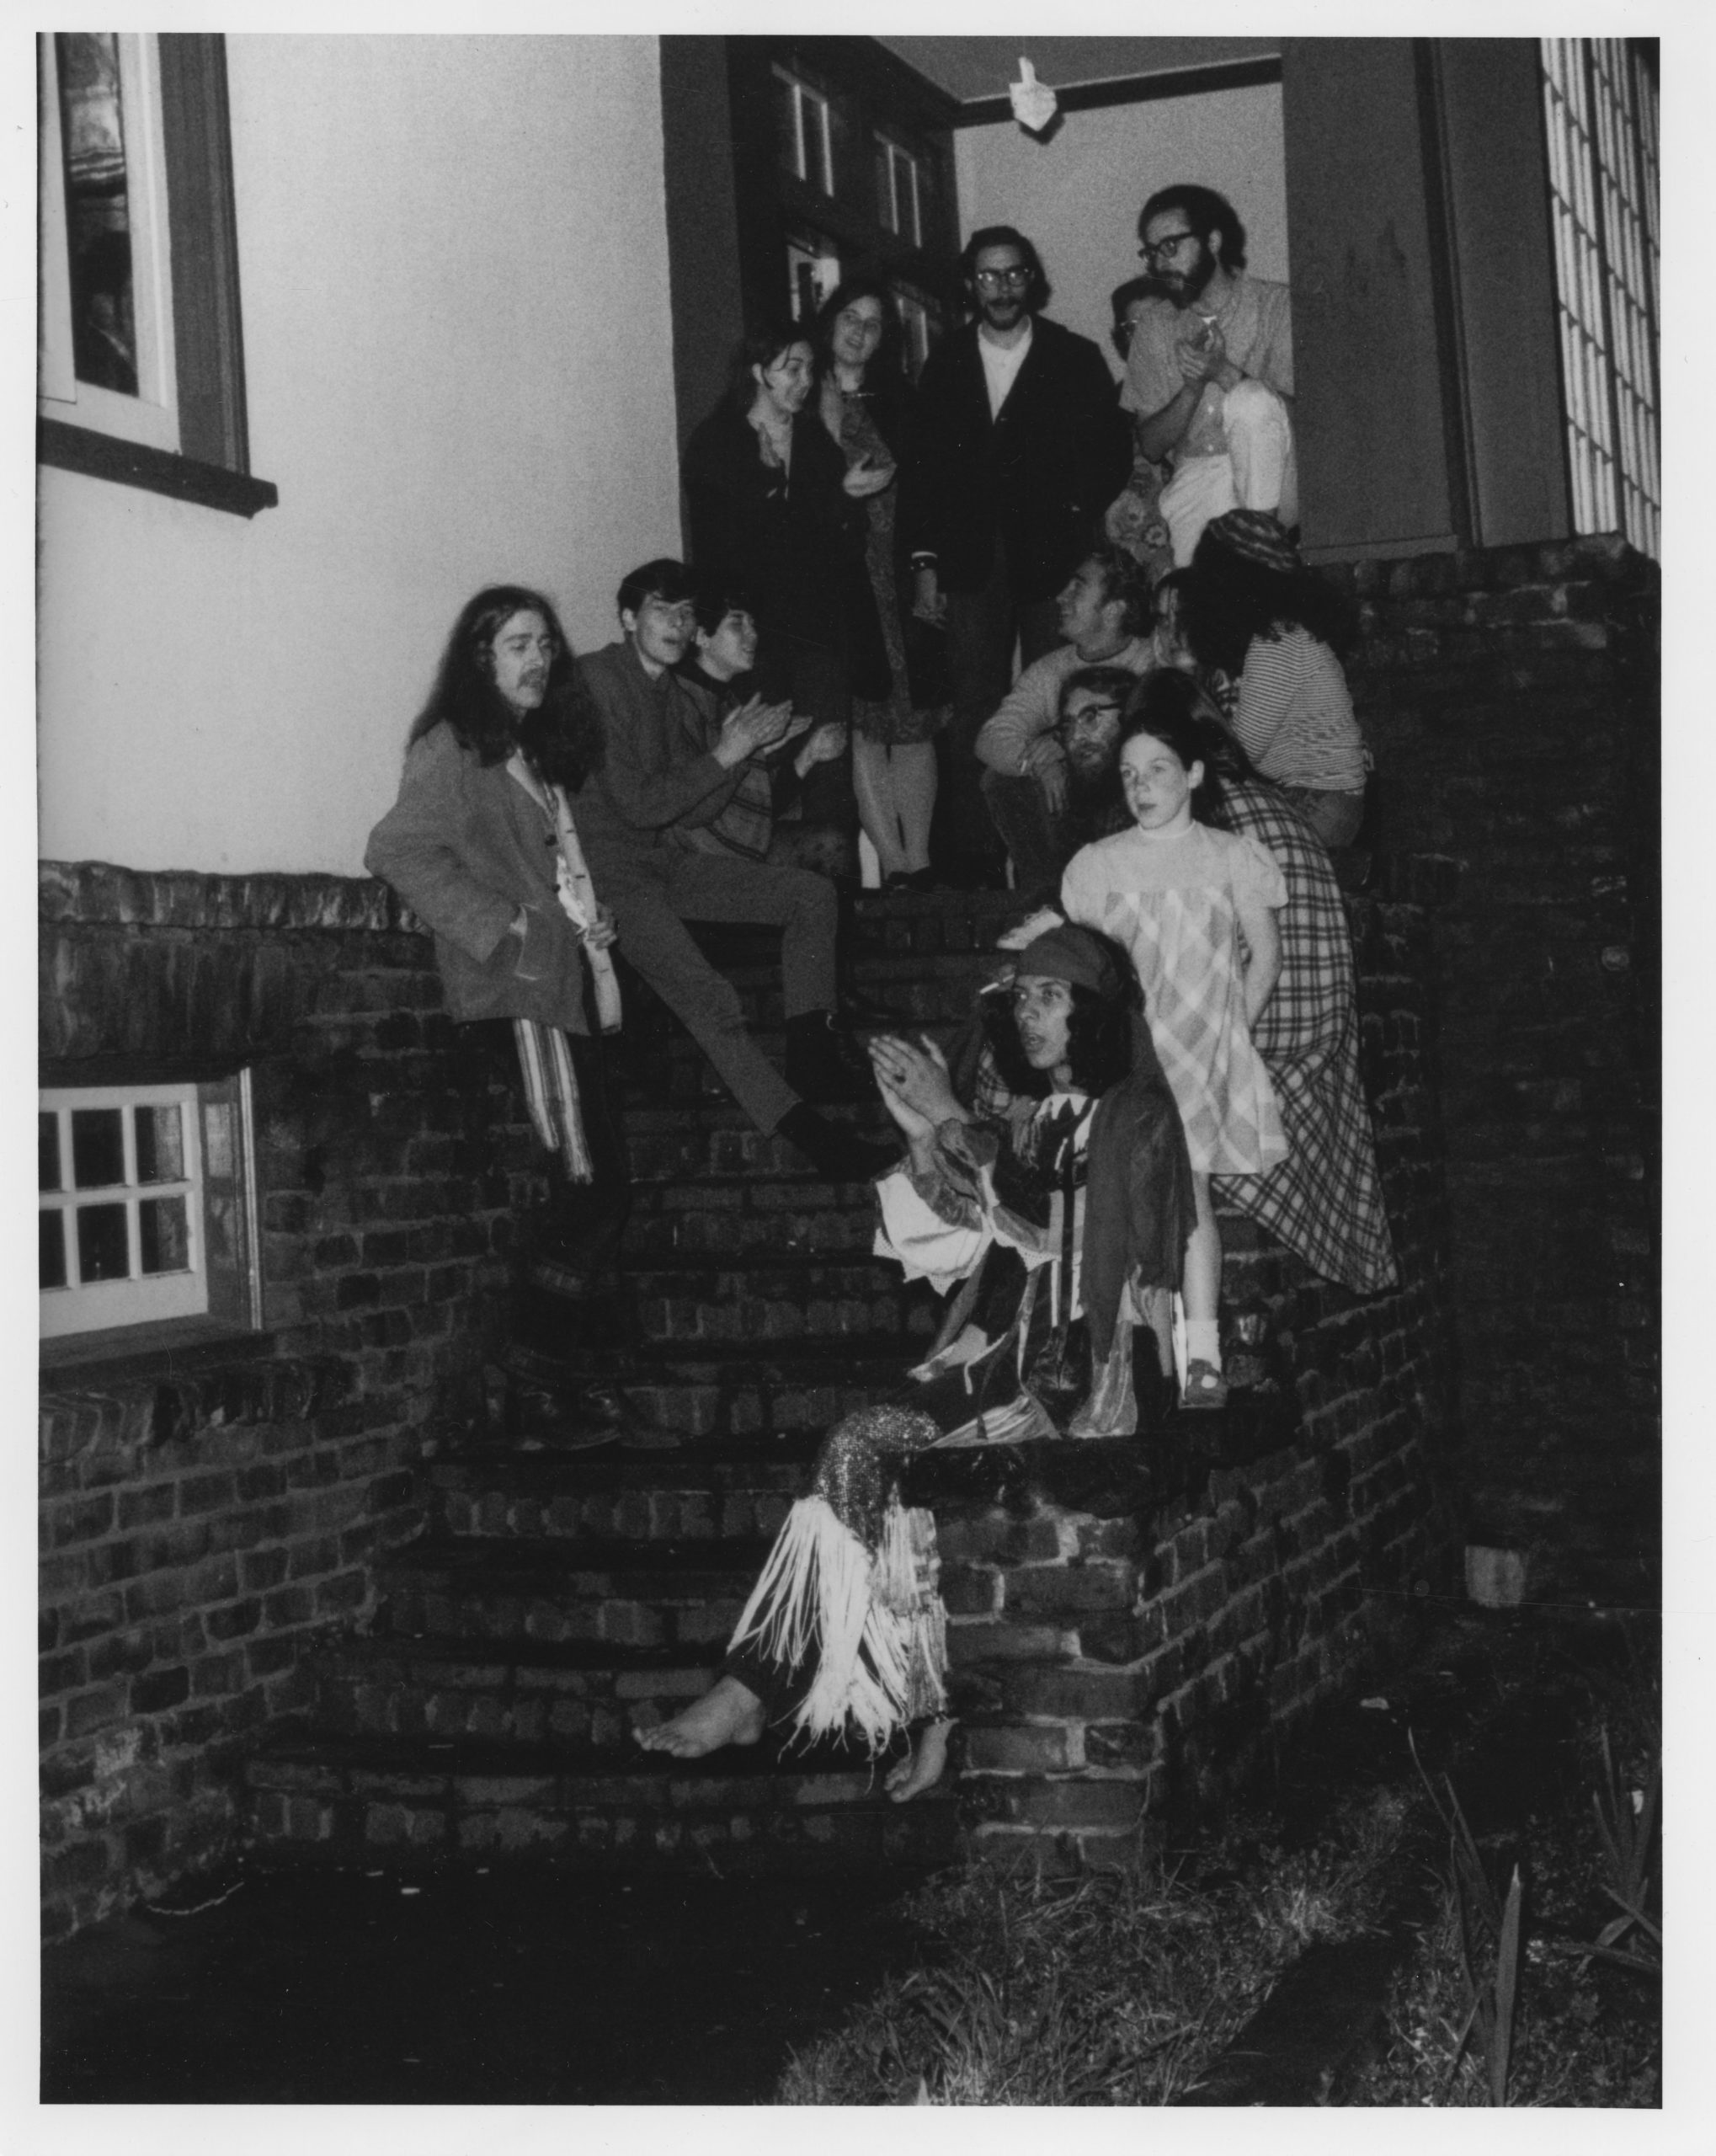 A group of hippies sitting on the front steps of the original House of Love and Prayer at 347 Arguello Blvd, circa 1969. Photograph by Marvin Kussoy, courtesy of Yehudit and Reuven Goldfarb.